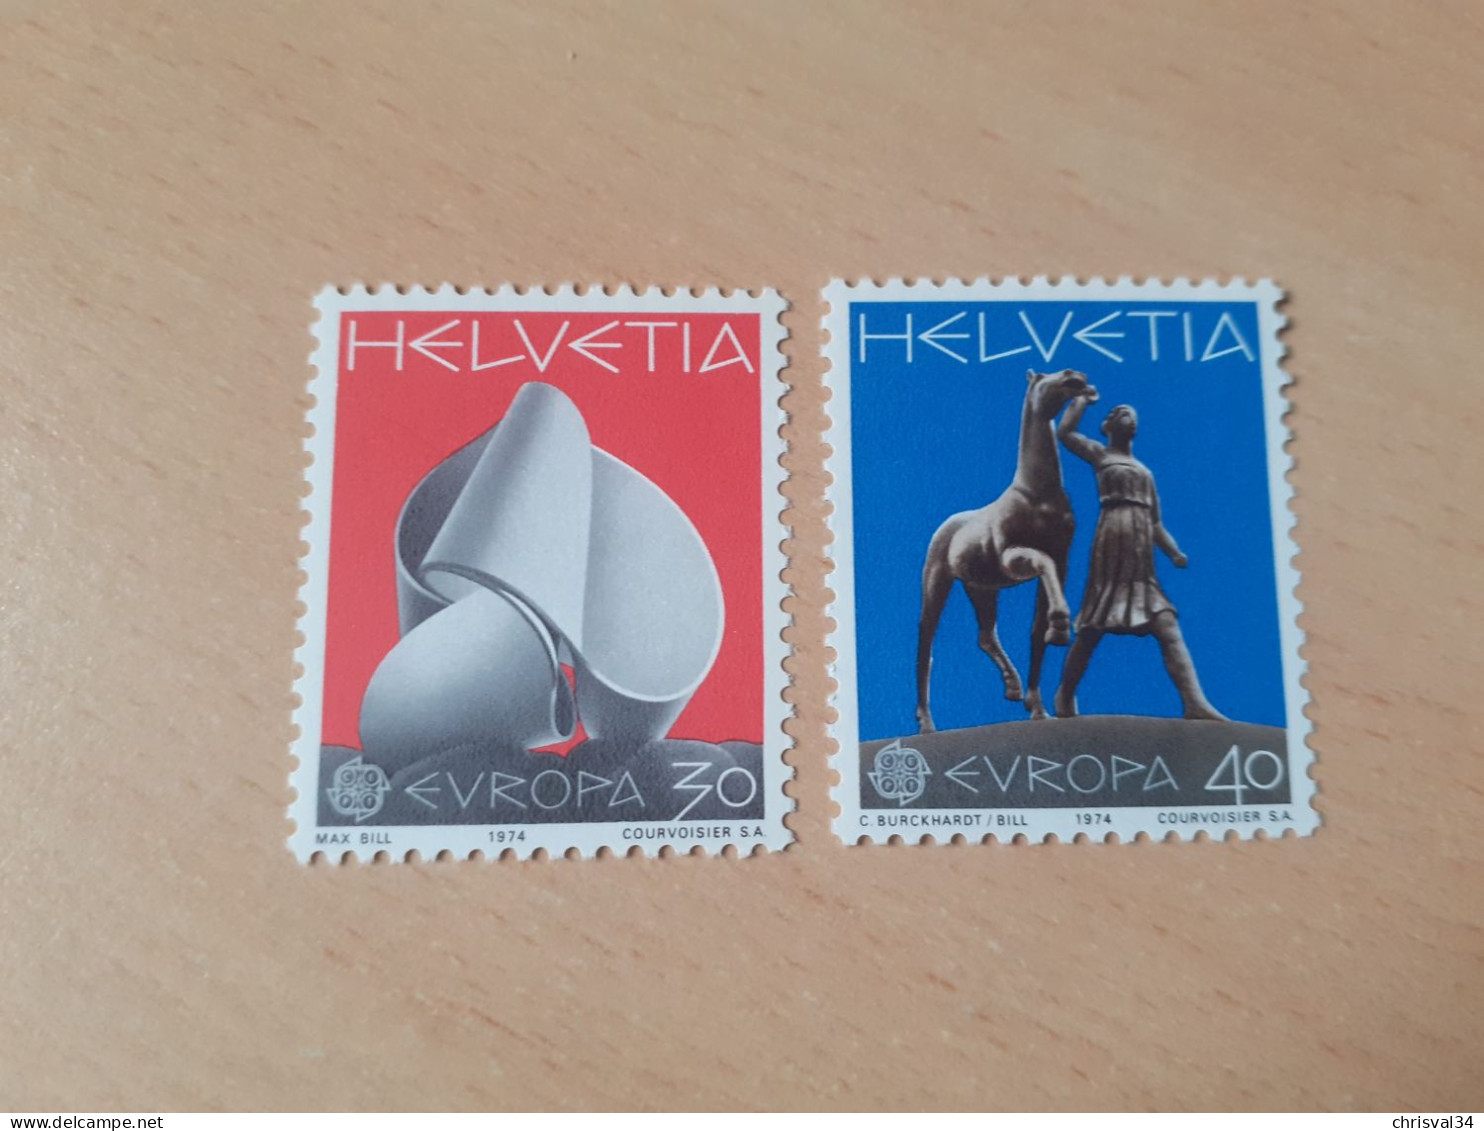 TIMBRES   SUISSE   ANNEE   1974   N  954  /  955   COTE  1,70  EUROS   NEUFS  LUXE** - Unused Stamps